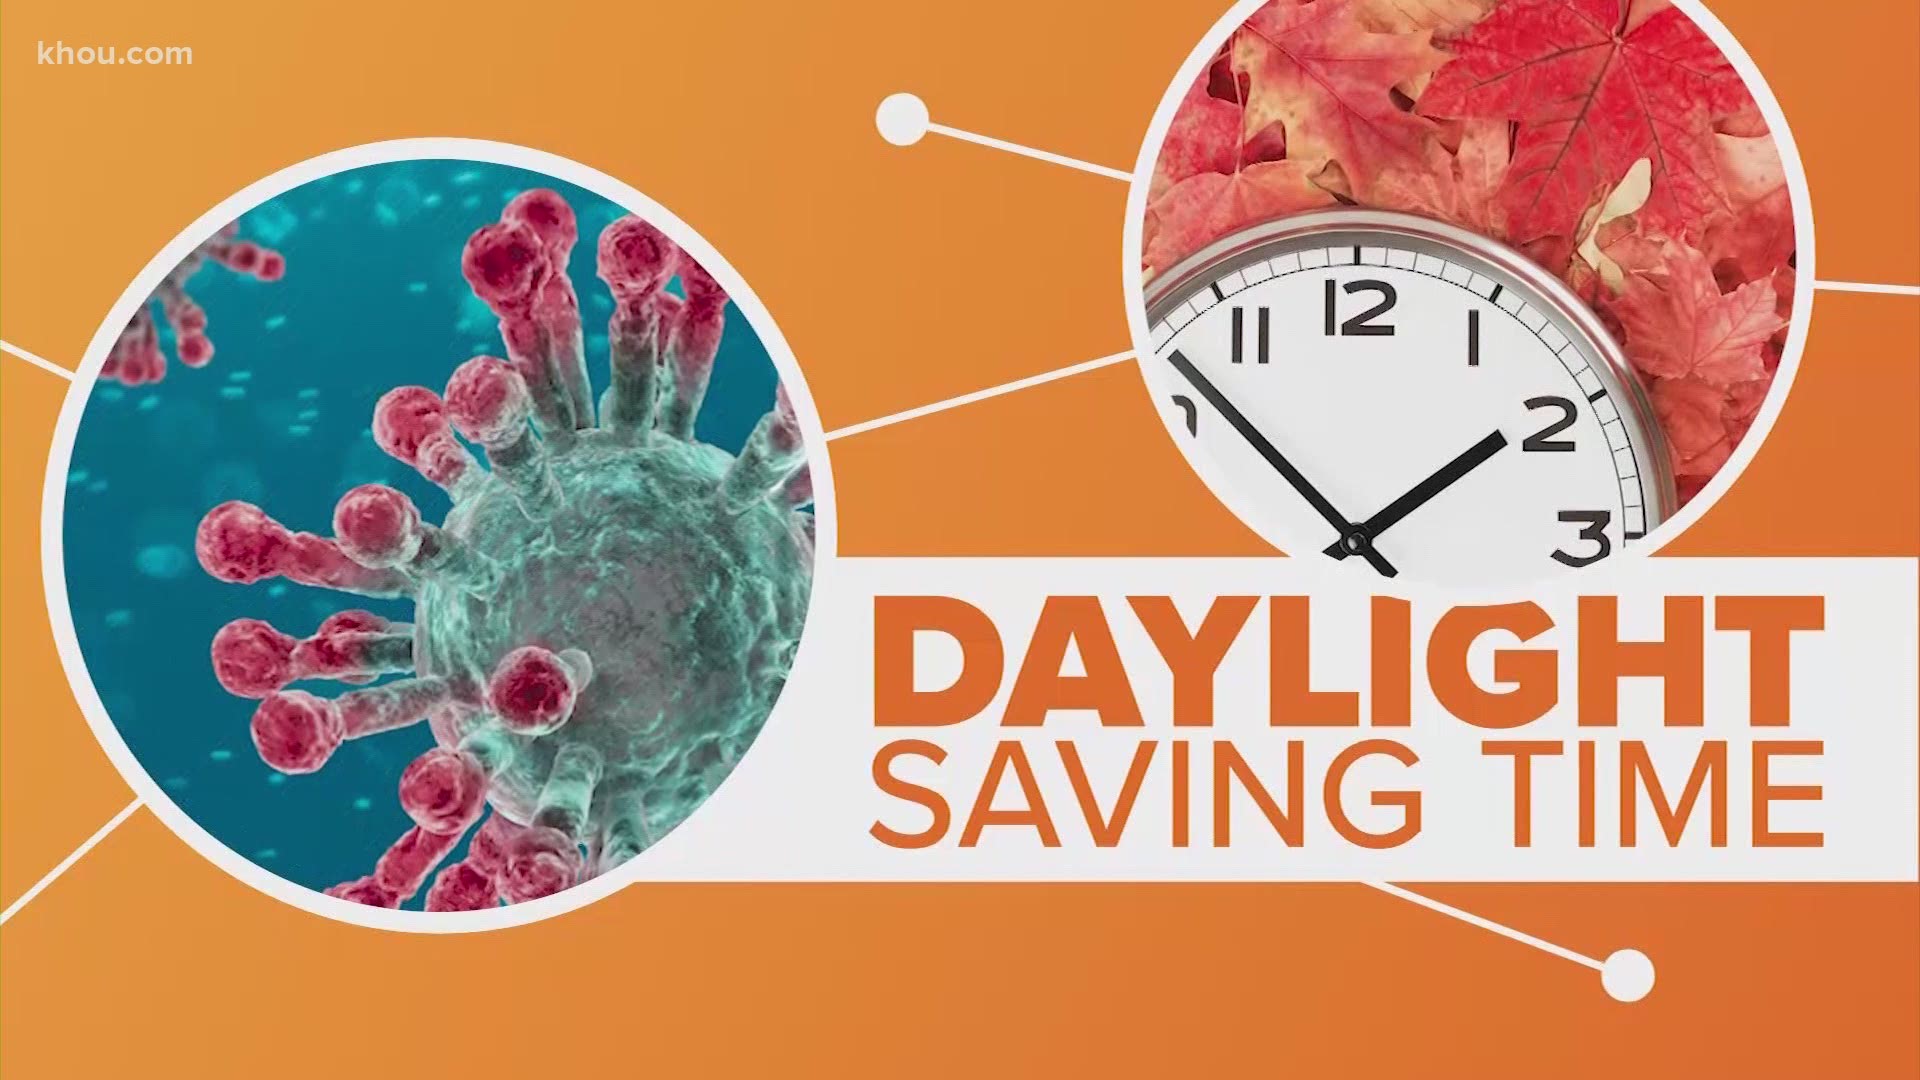 It's to time fallback! But many argue the coronavirus pandemic makes setting our clocks back hour a lot more tedious this year.